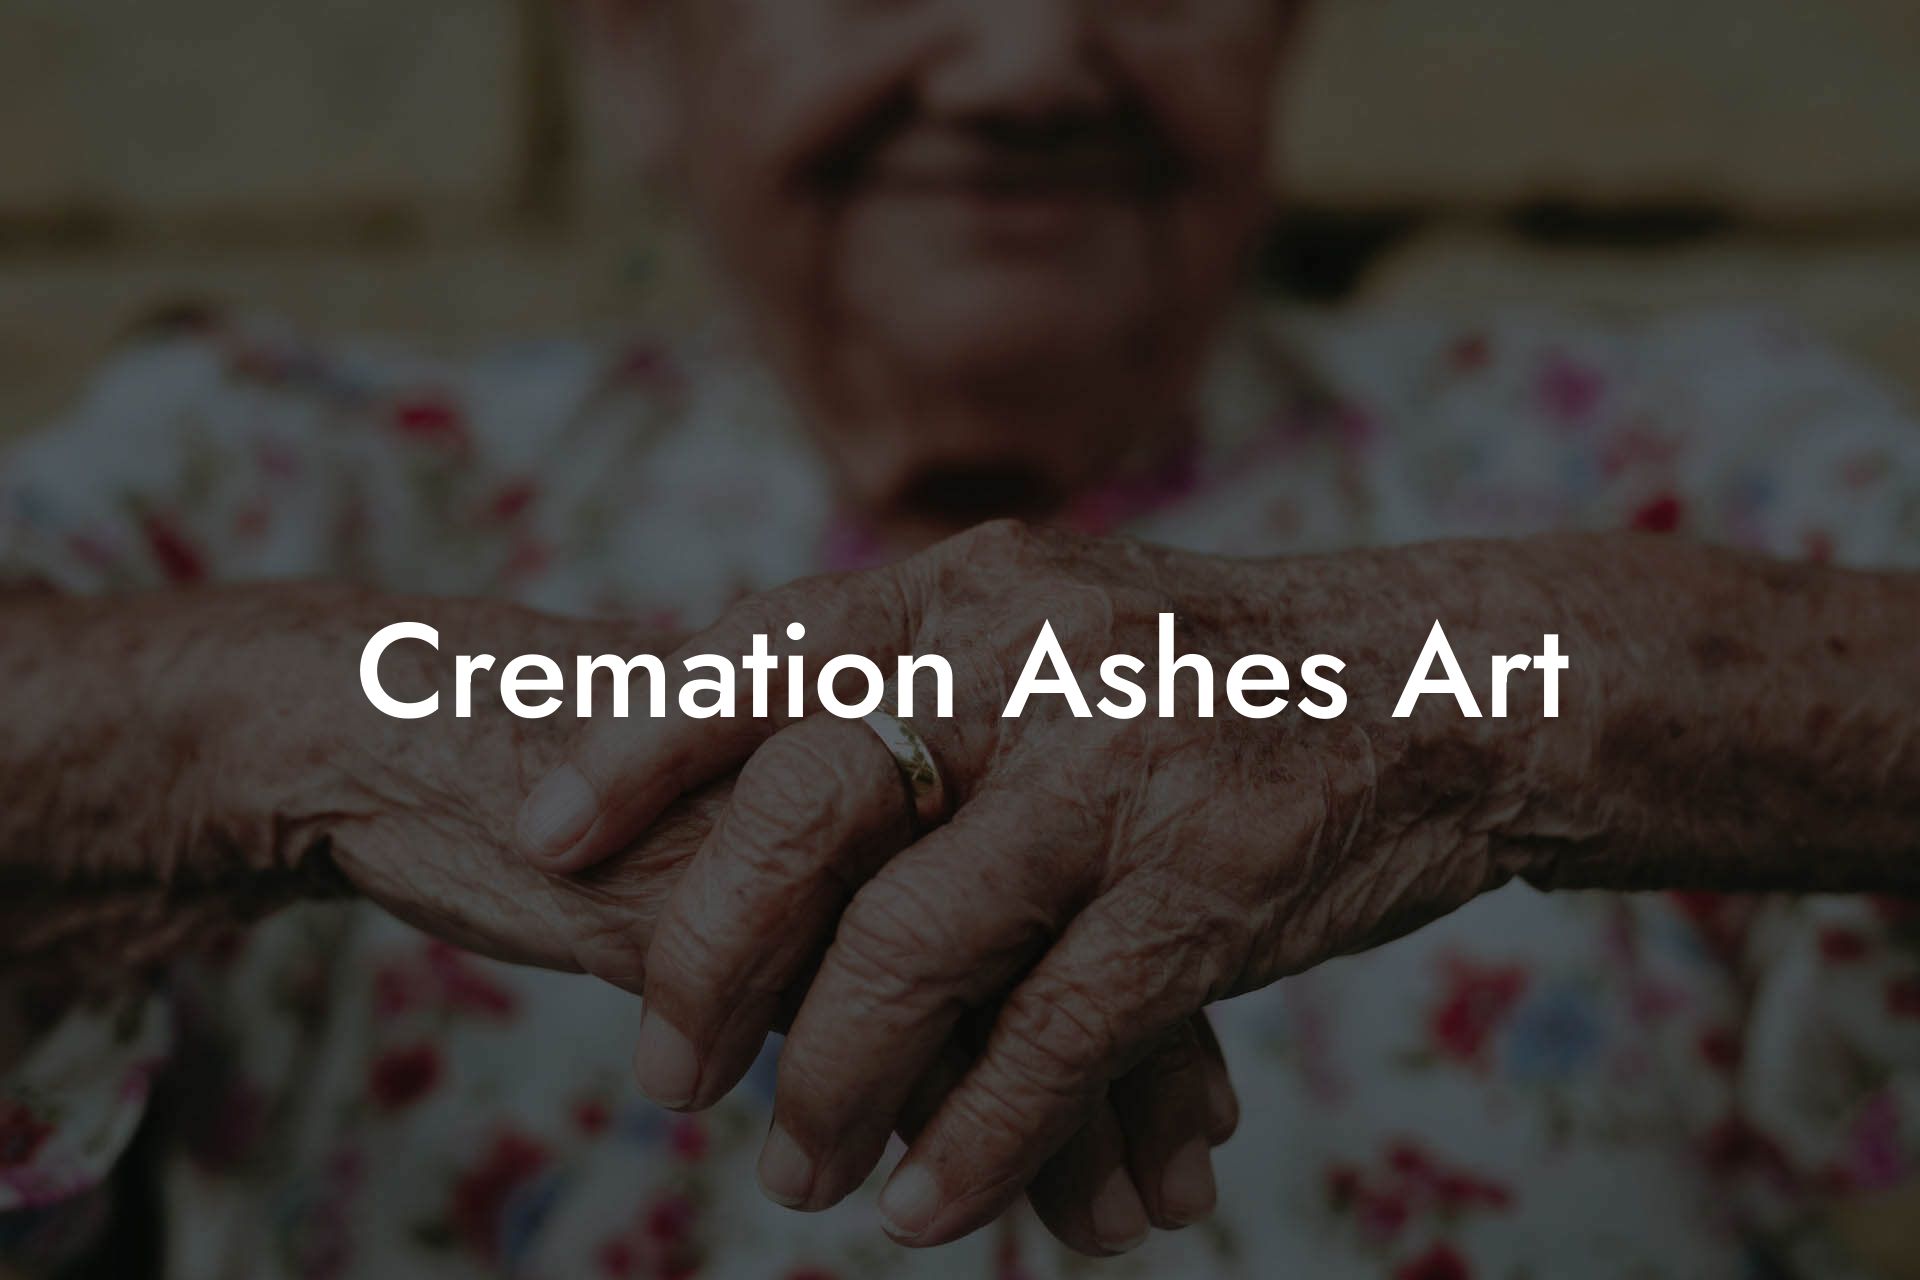 Cremation Ashes Art